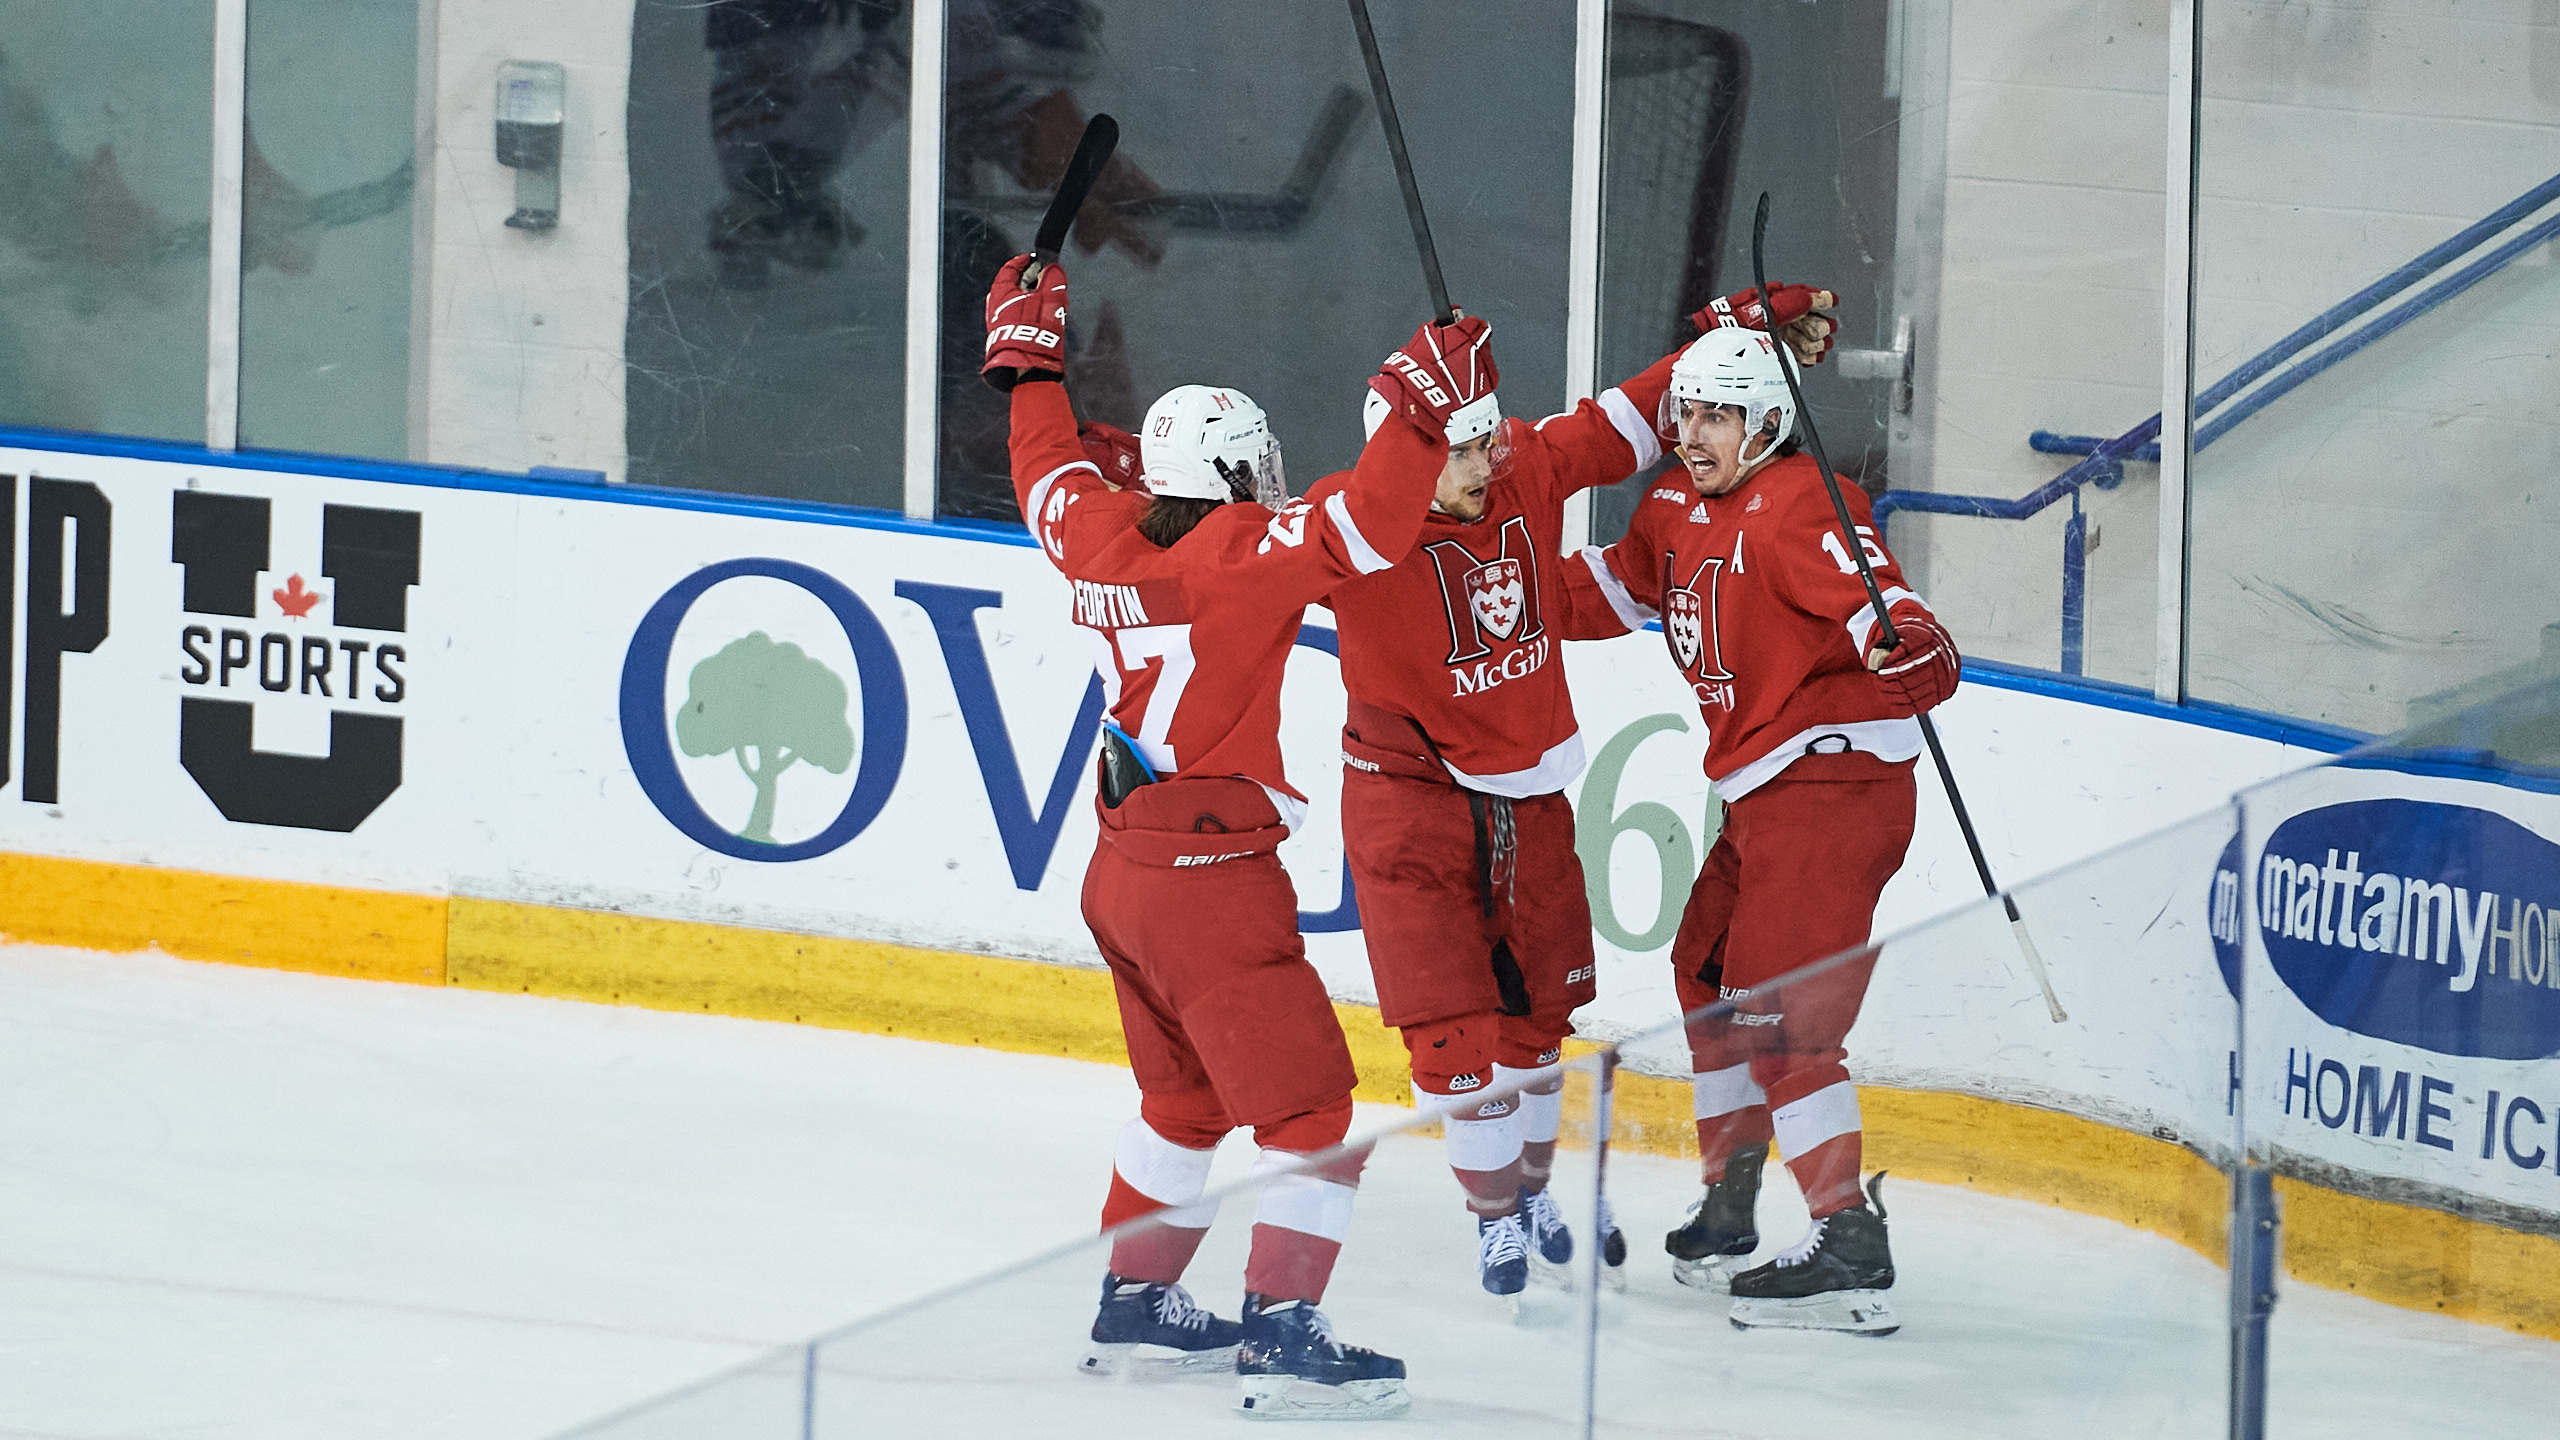 McGill University hockey players celebrate with their hands in the air